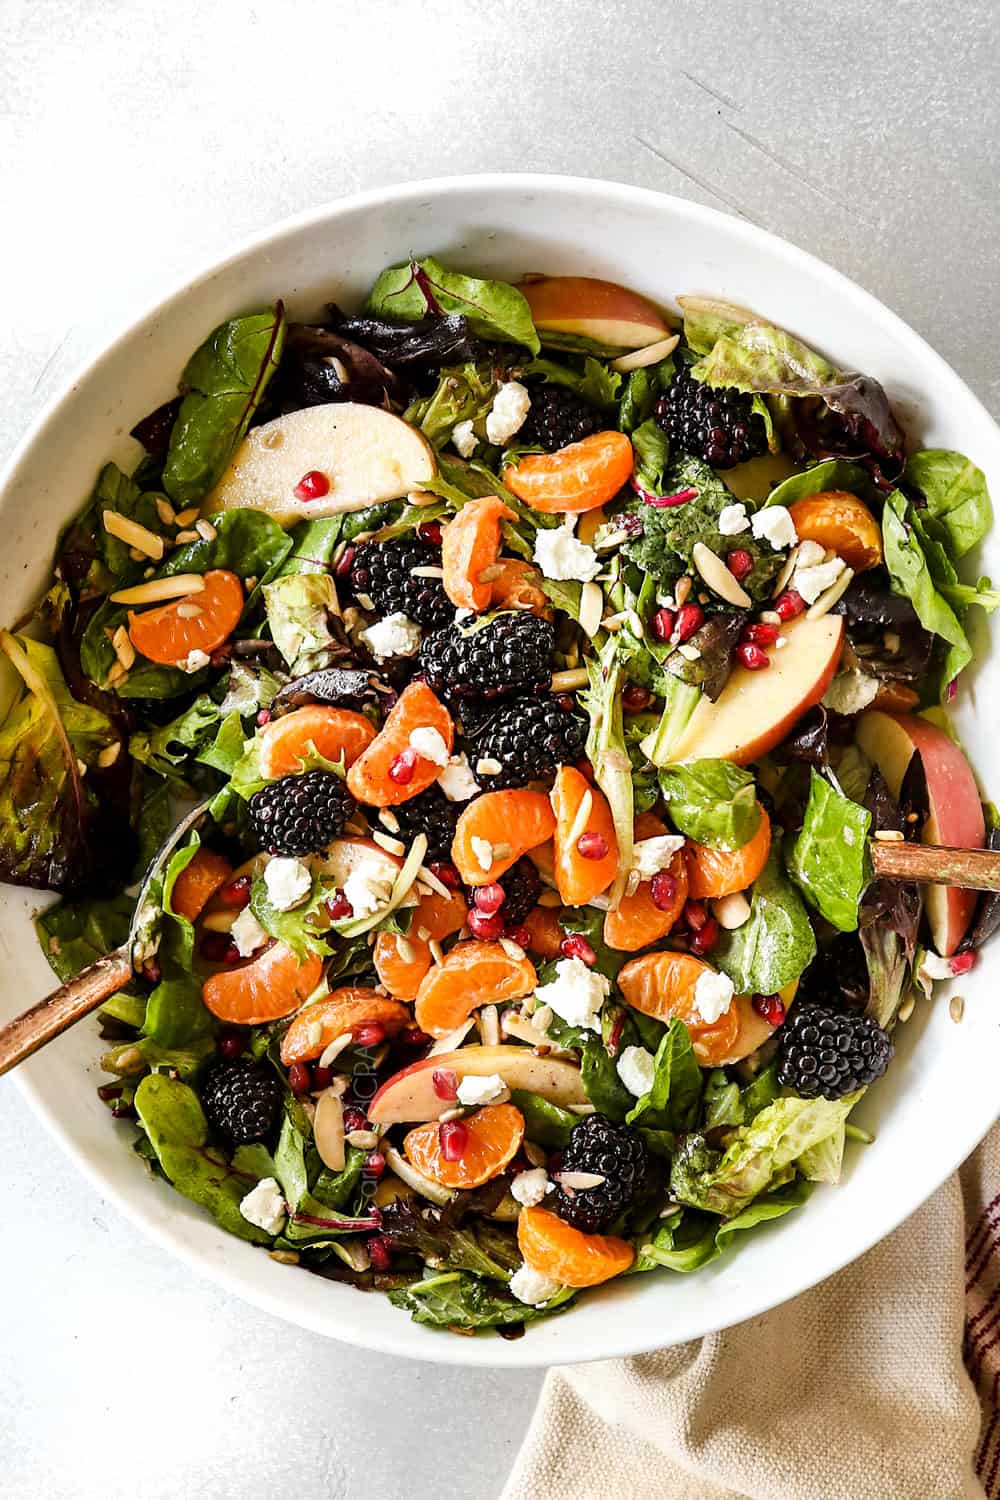 showing how to make Mandarin Orange Salad by tossing mandarins, apples, goat cheese, blackberries and pomegranates together with dressing